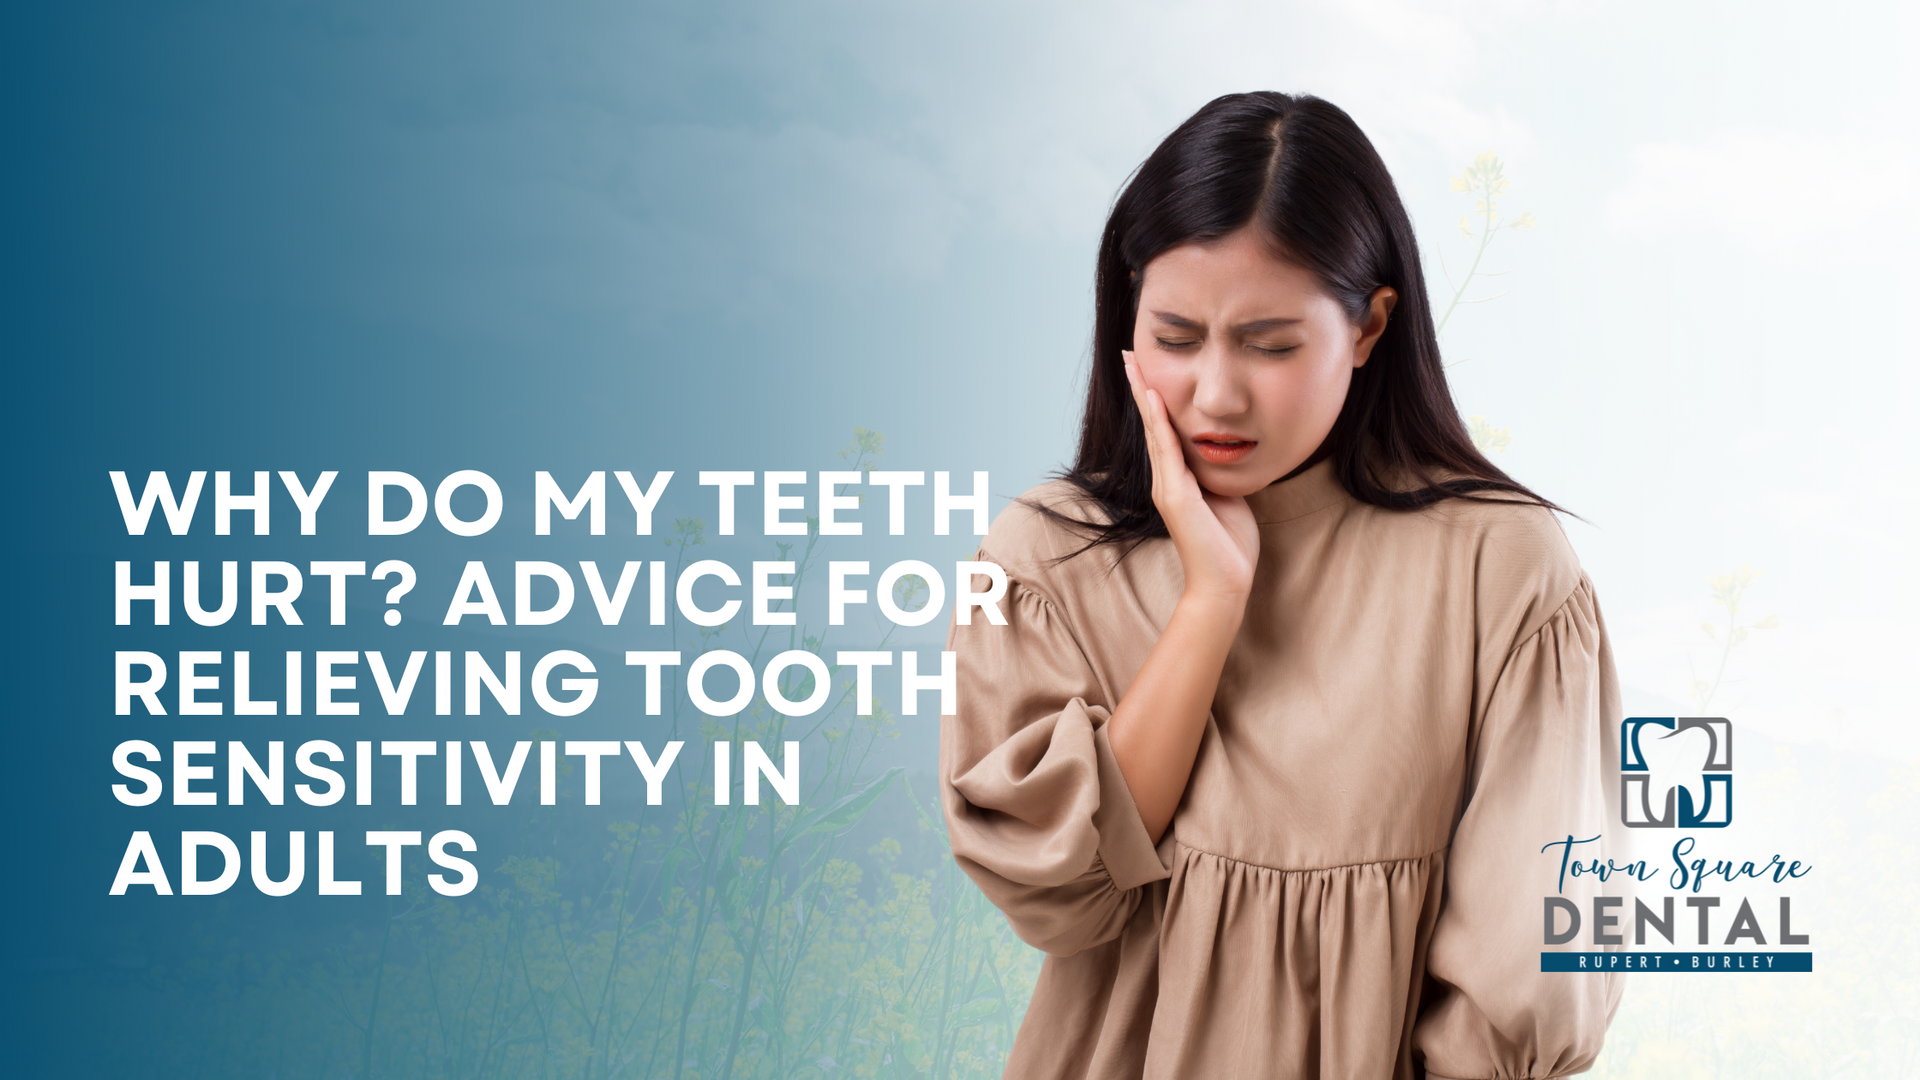 Why do my teeth hurt ? advice for relieving tooth sensitivity in adults